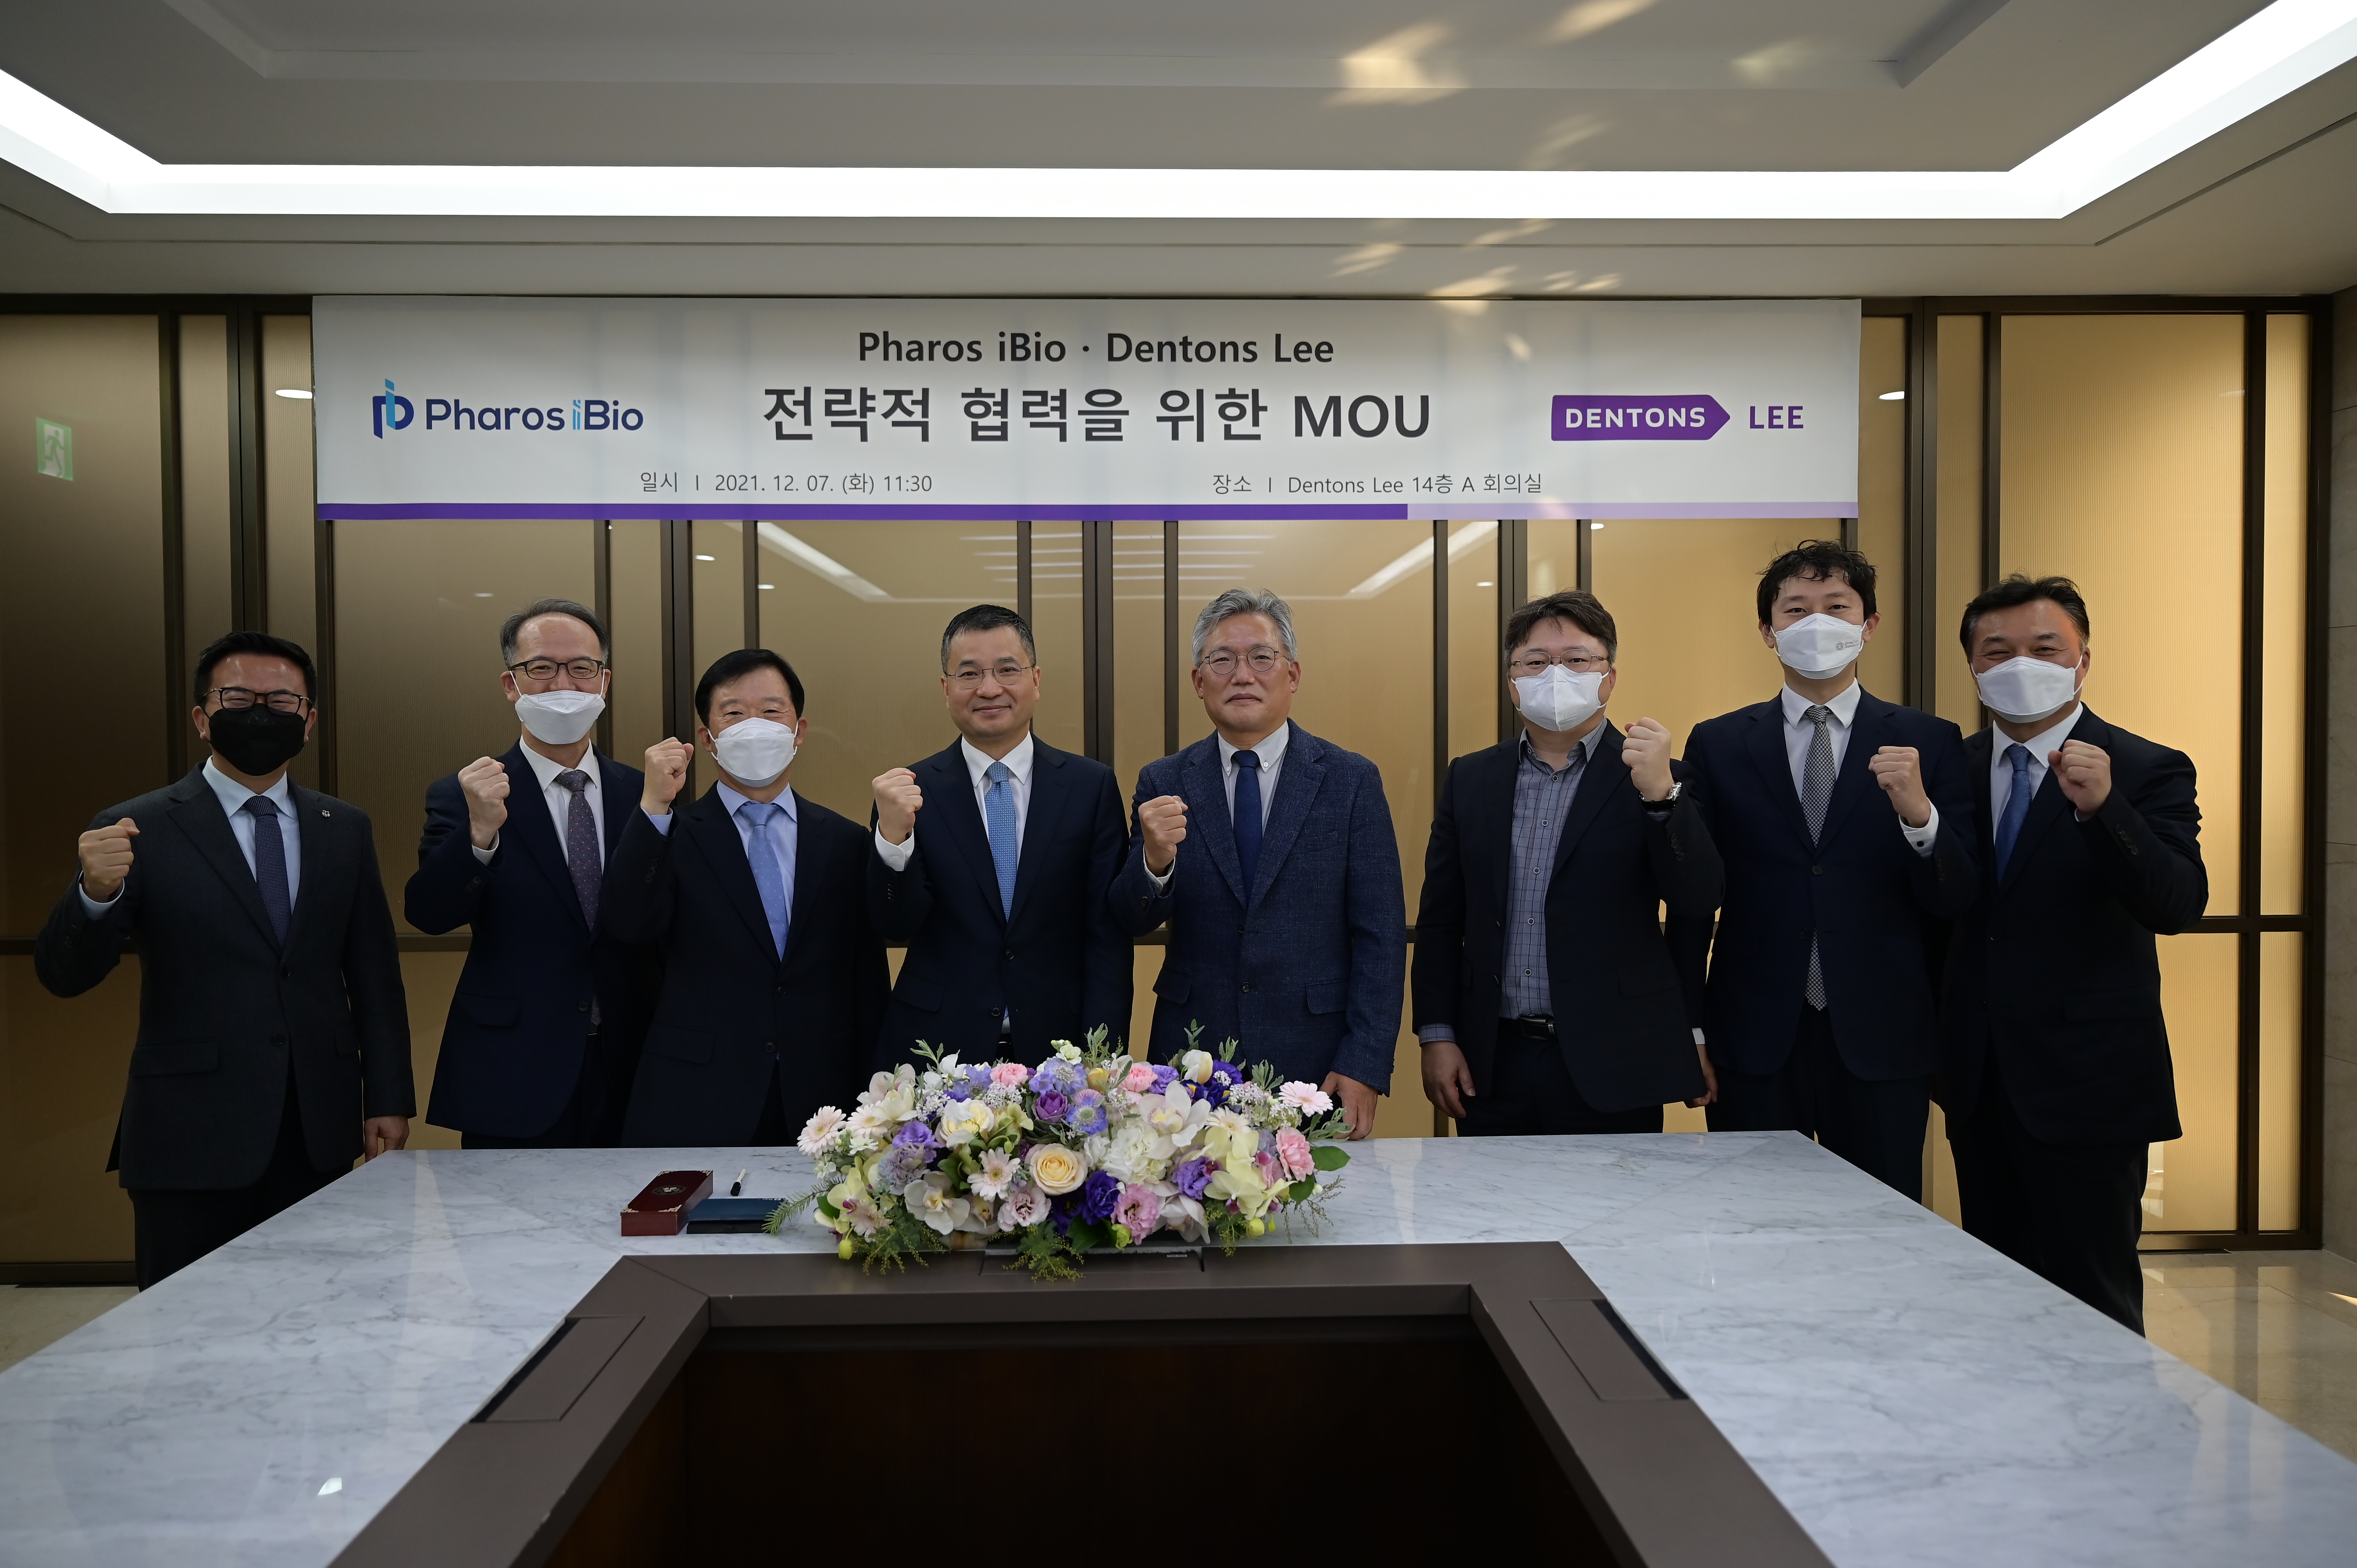 Dentons Lee signed MOU with Pharos